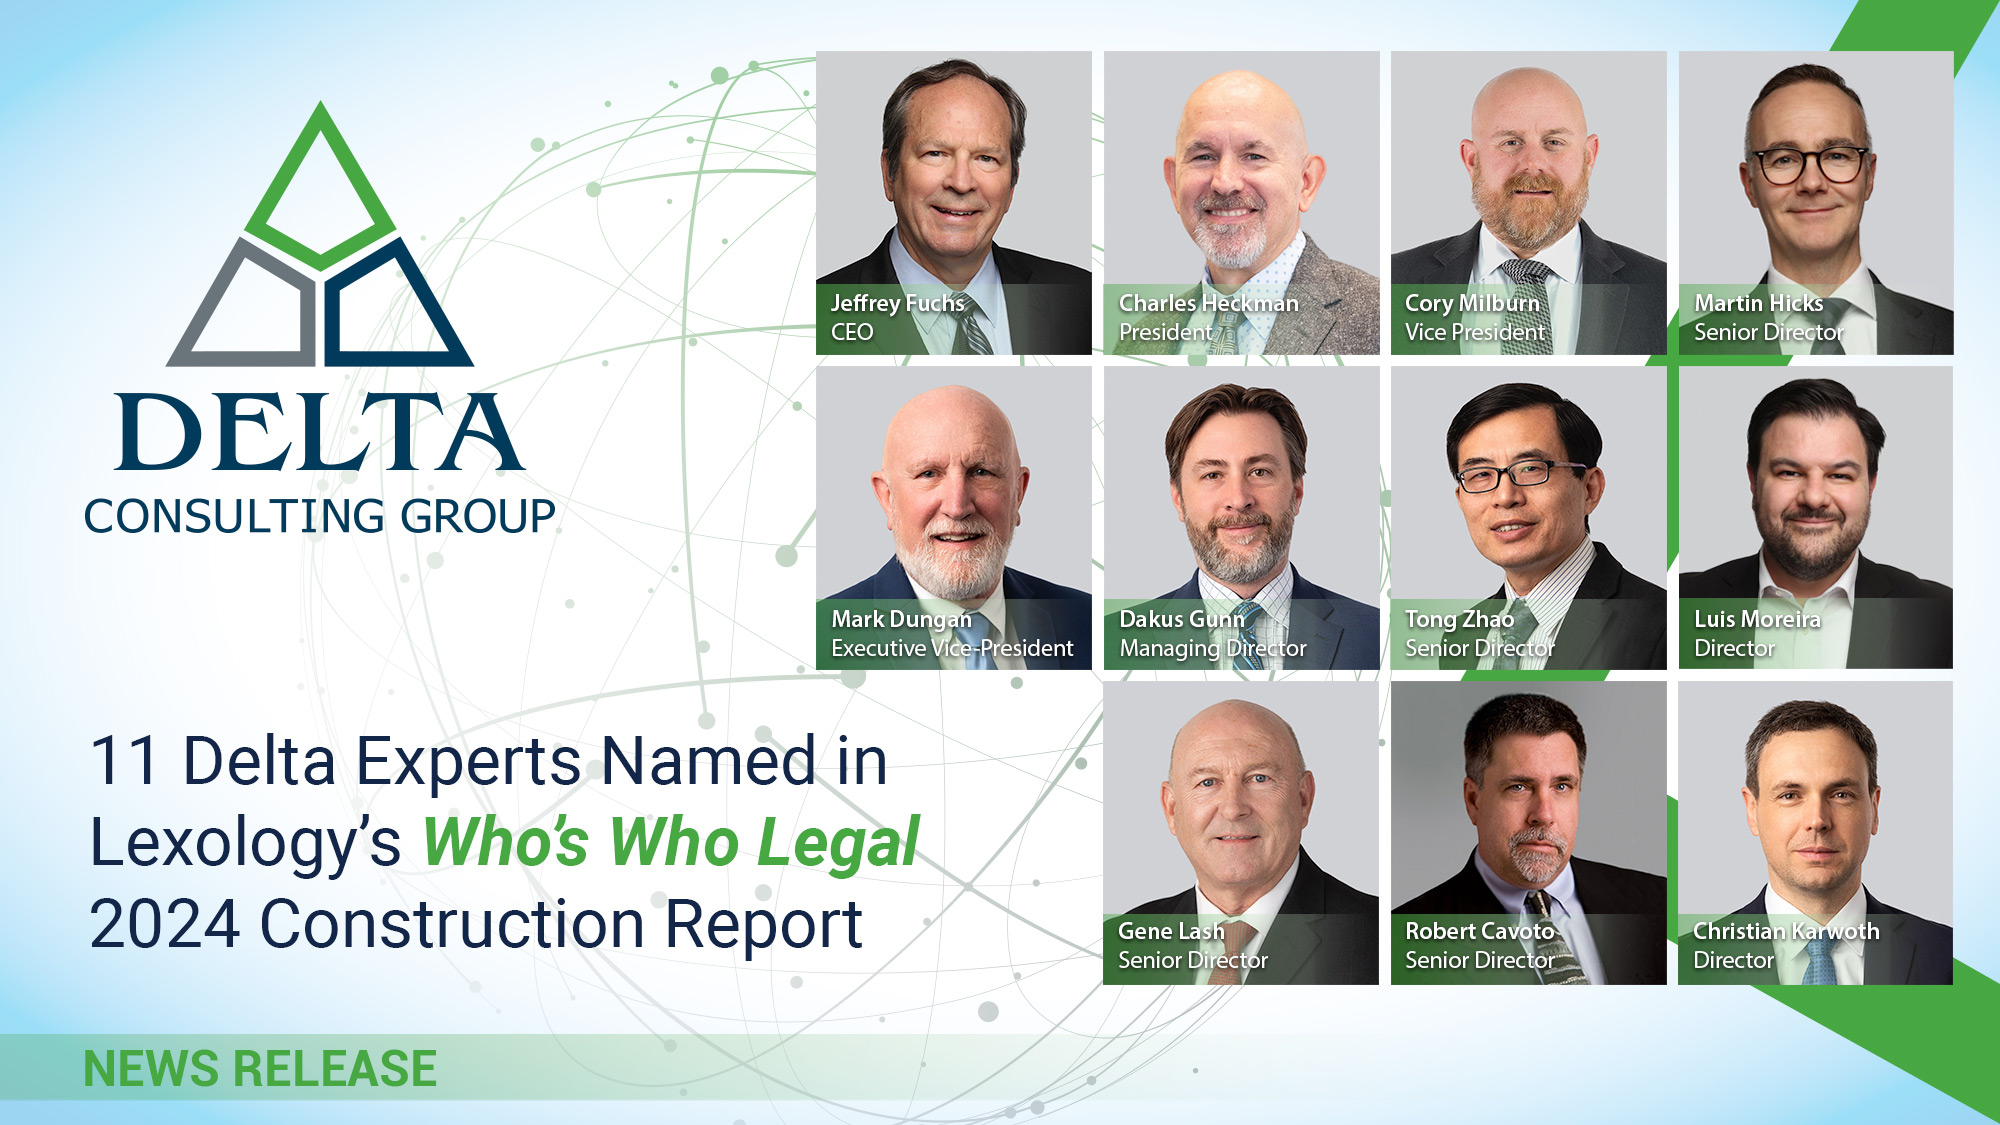 11 Delta Experts Named in Lexology’s Who’s Who Legal 2024 Construction Report